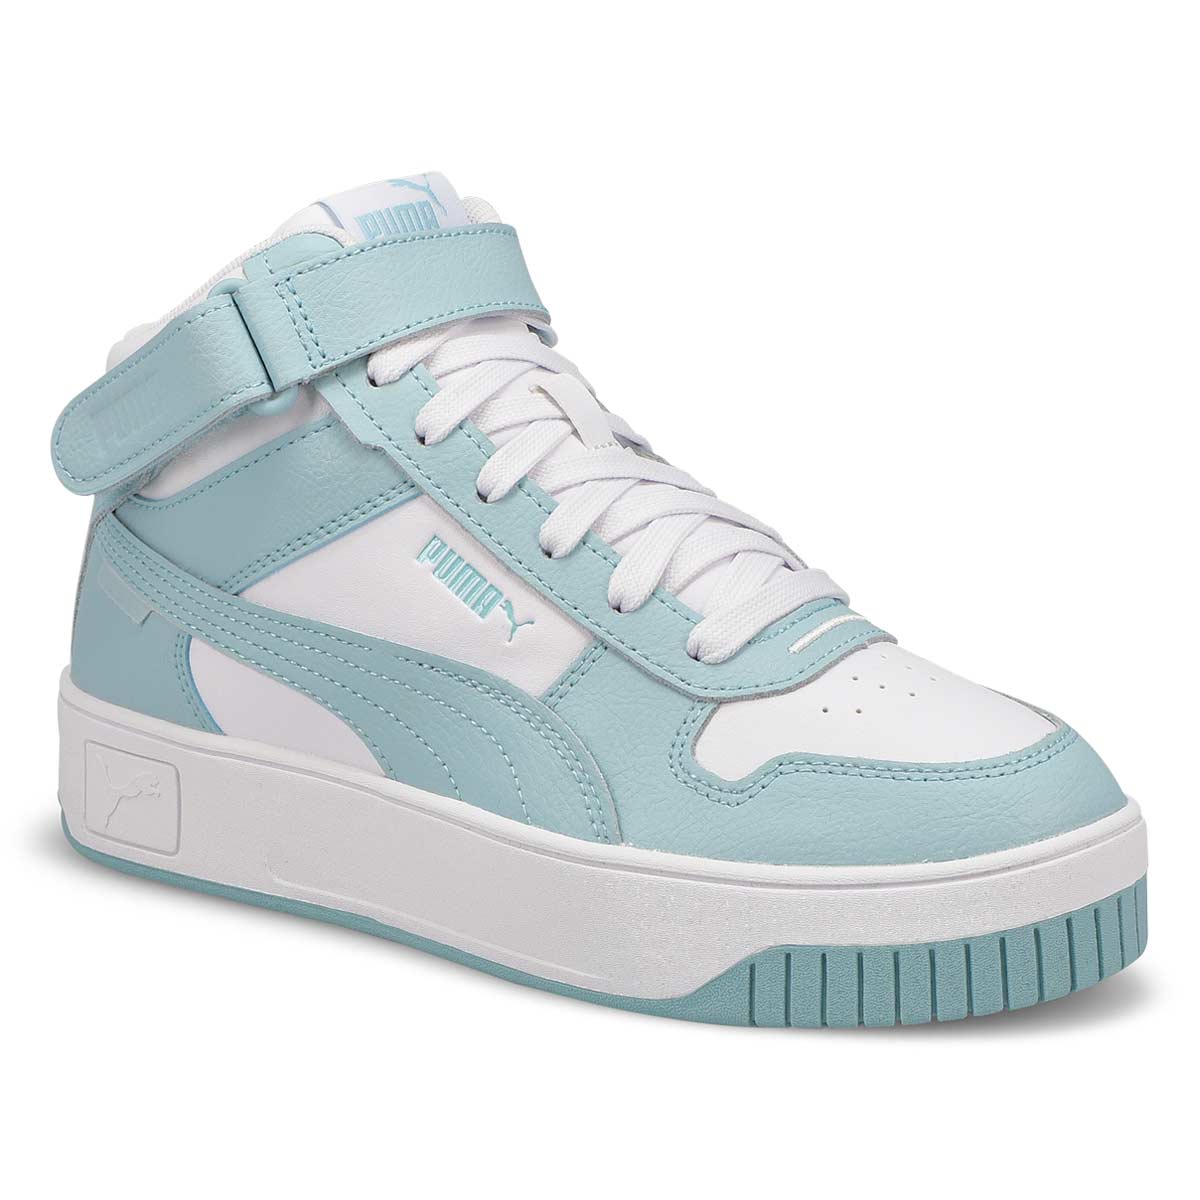 Womens Carina Street Mid Lace Up Sneaker- White/Turquoise